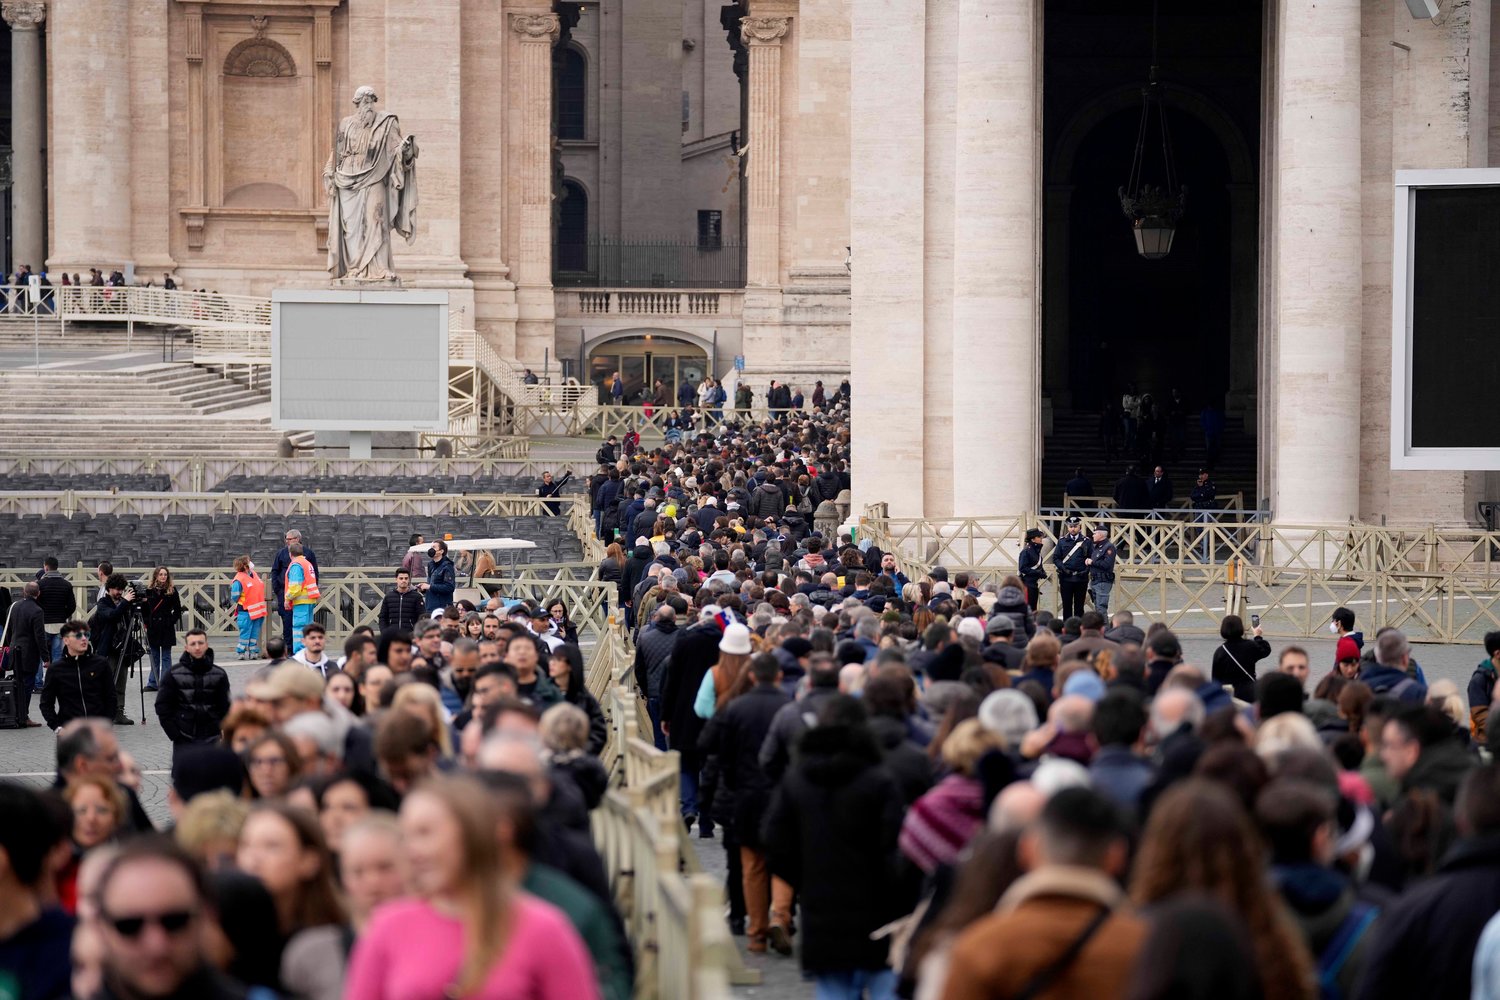 People wait in a line to enter Saint Peter's Basilica at the Vatican where late Pope Benedict 16 is being laid in state at The Vatican, Monday, Jan. 2. Benedict XVI, the German theologian who will be remembered as the first pope in 600 years to resign, died on Saturday. He was 95.